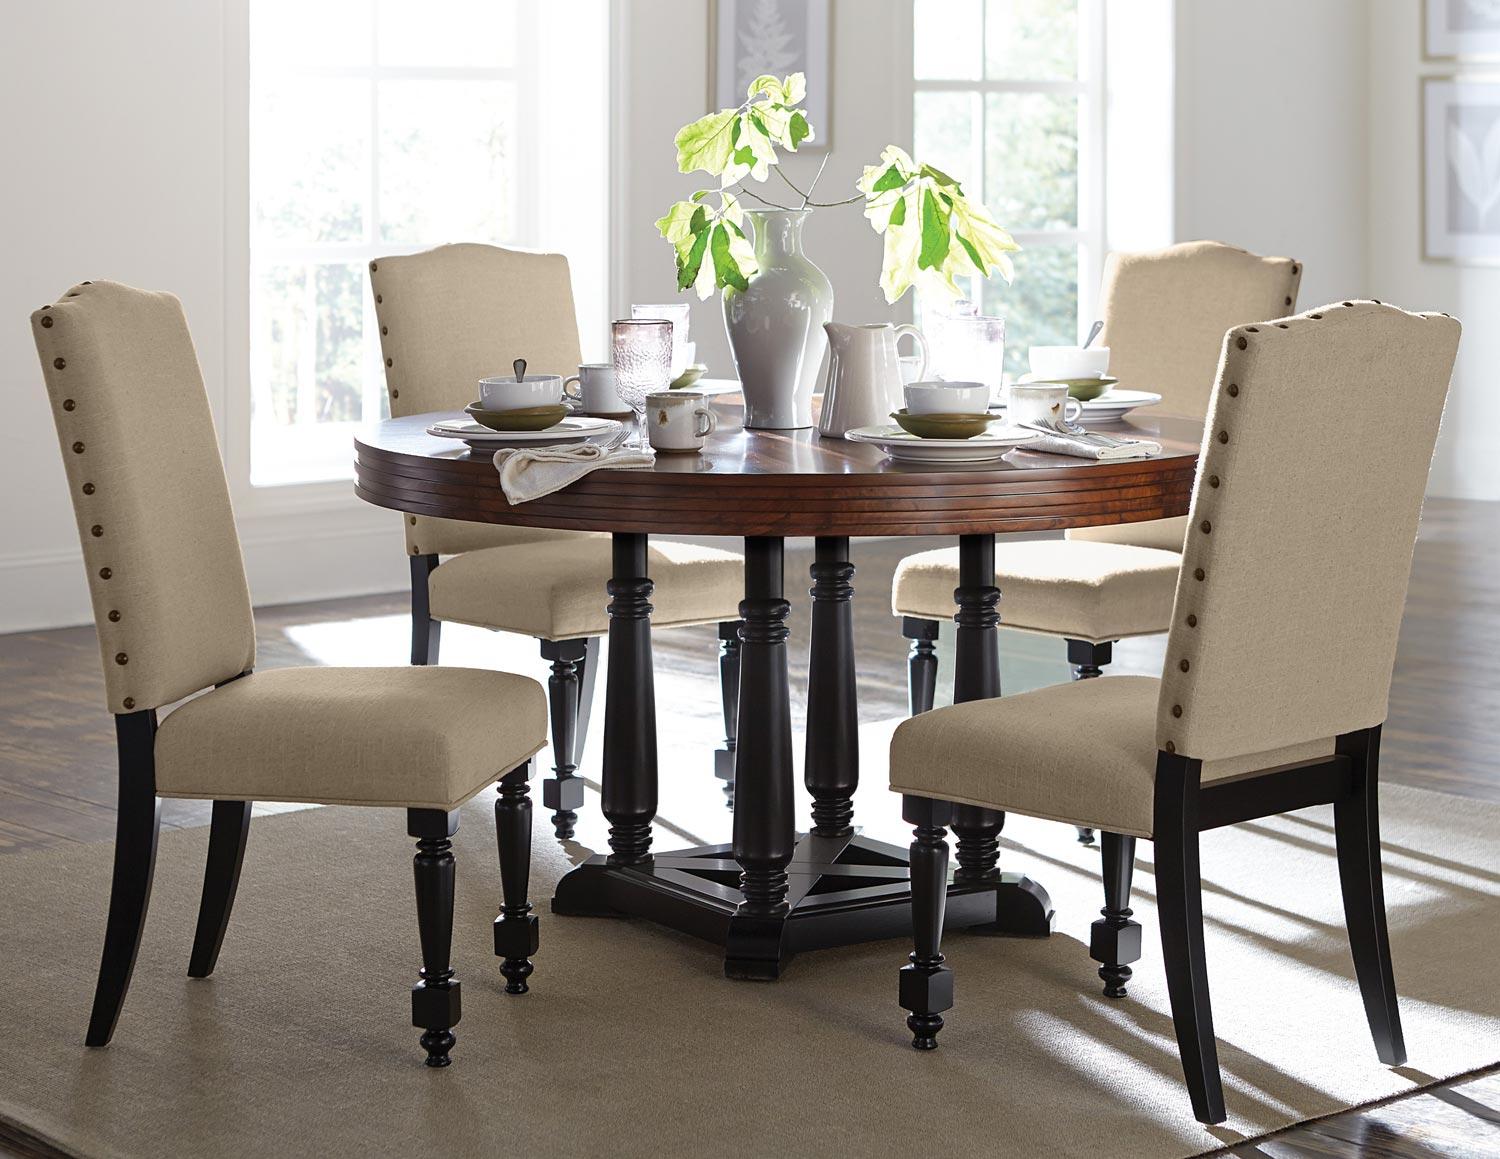 

    
Homelegance Blossomwood Dining Table Set Cherry 5404-54+5404Sx4-Blossomwood
